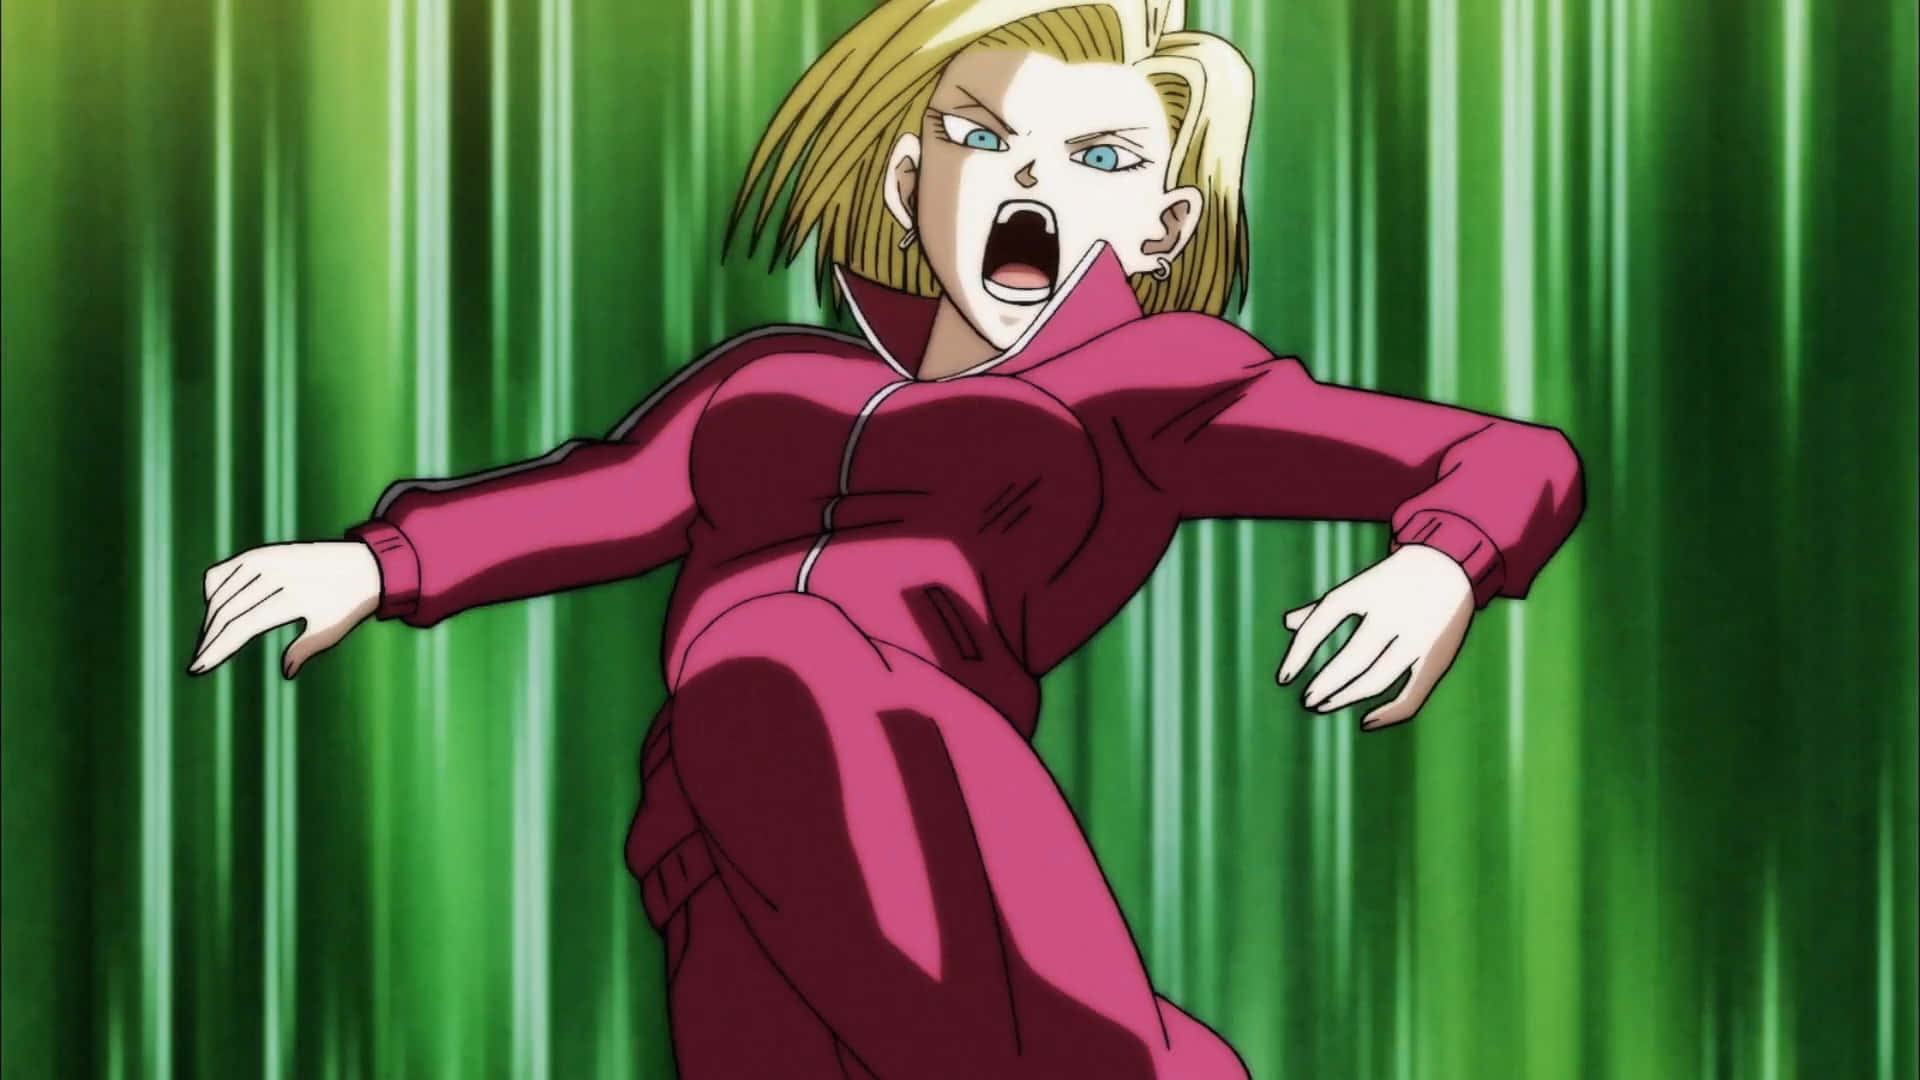 Android18 Shocked Expression Wallpaper